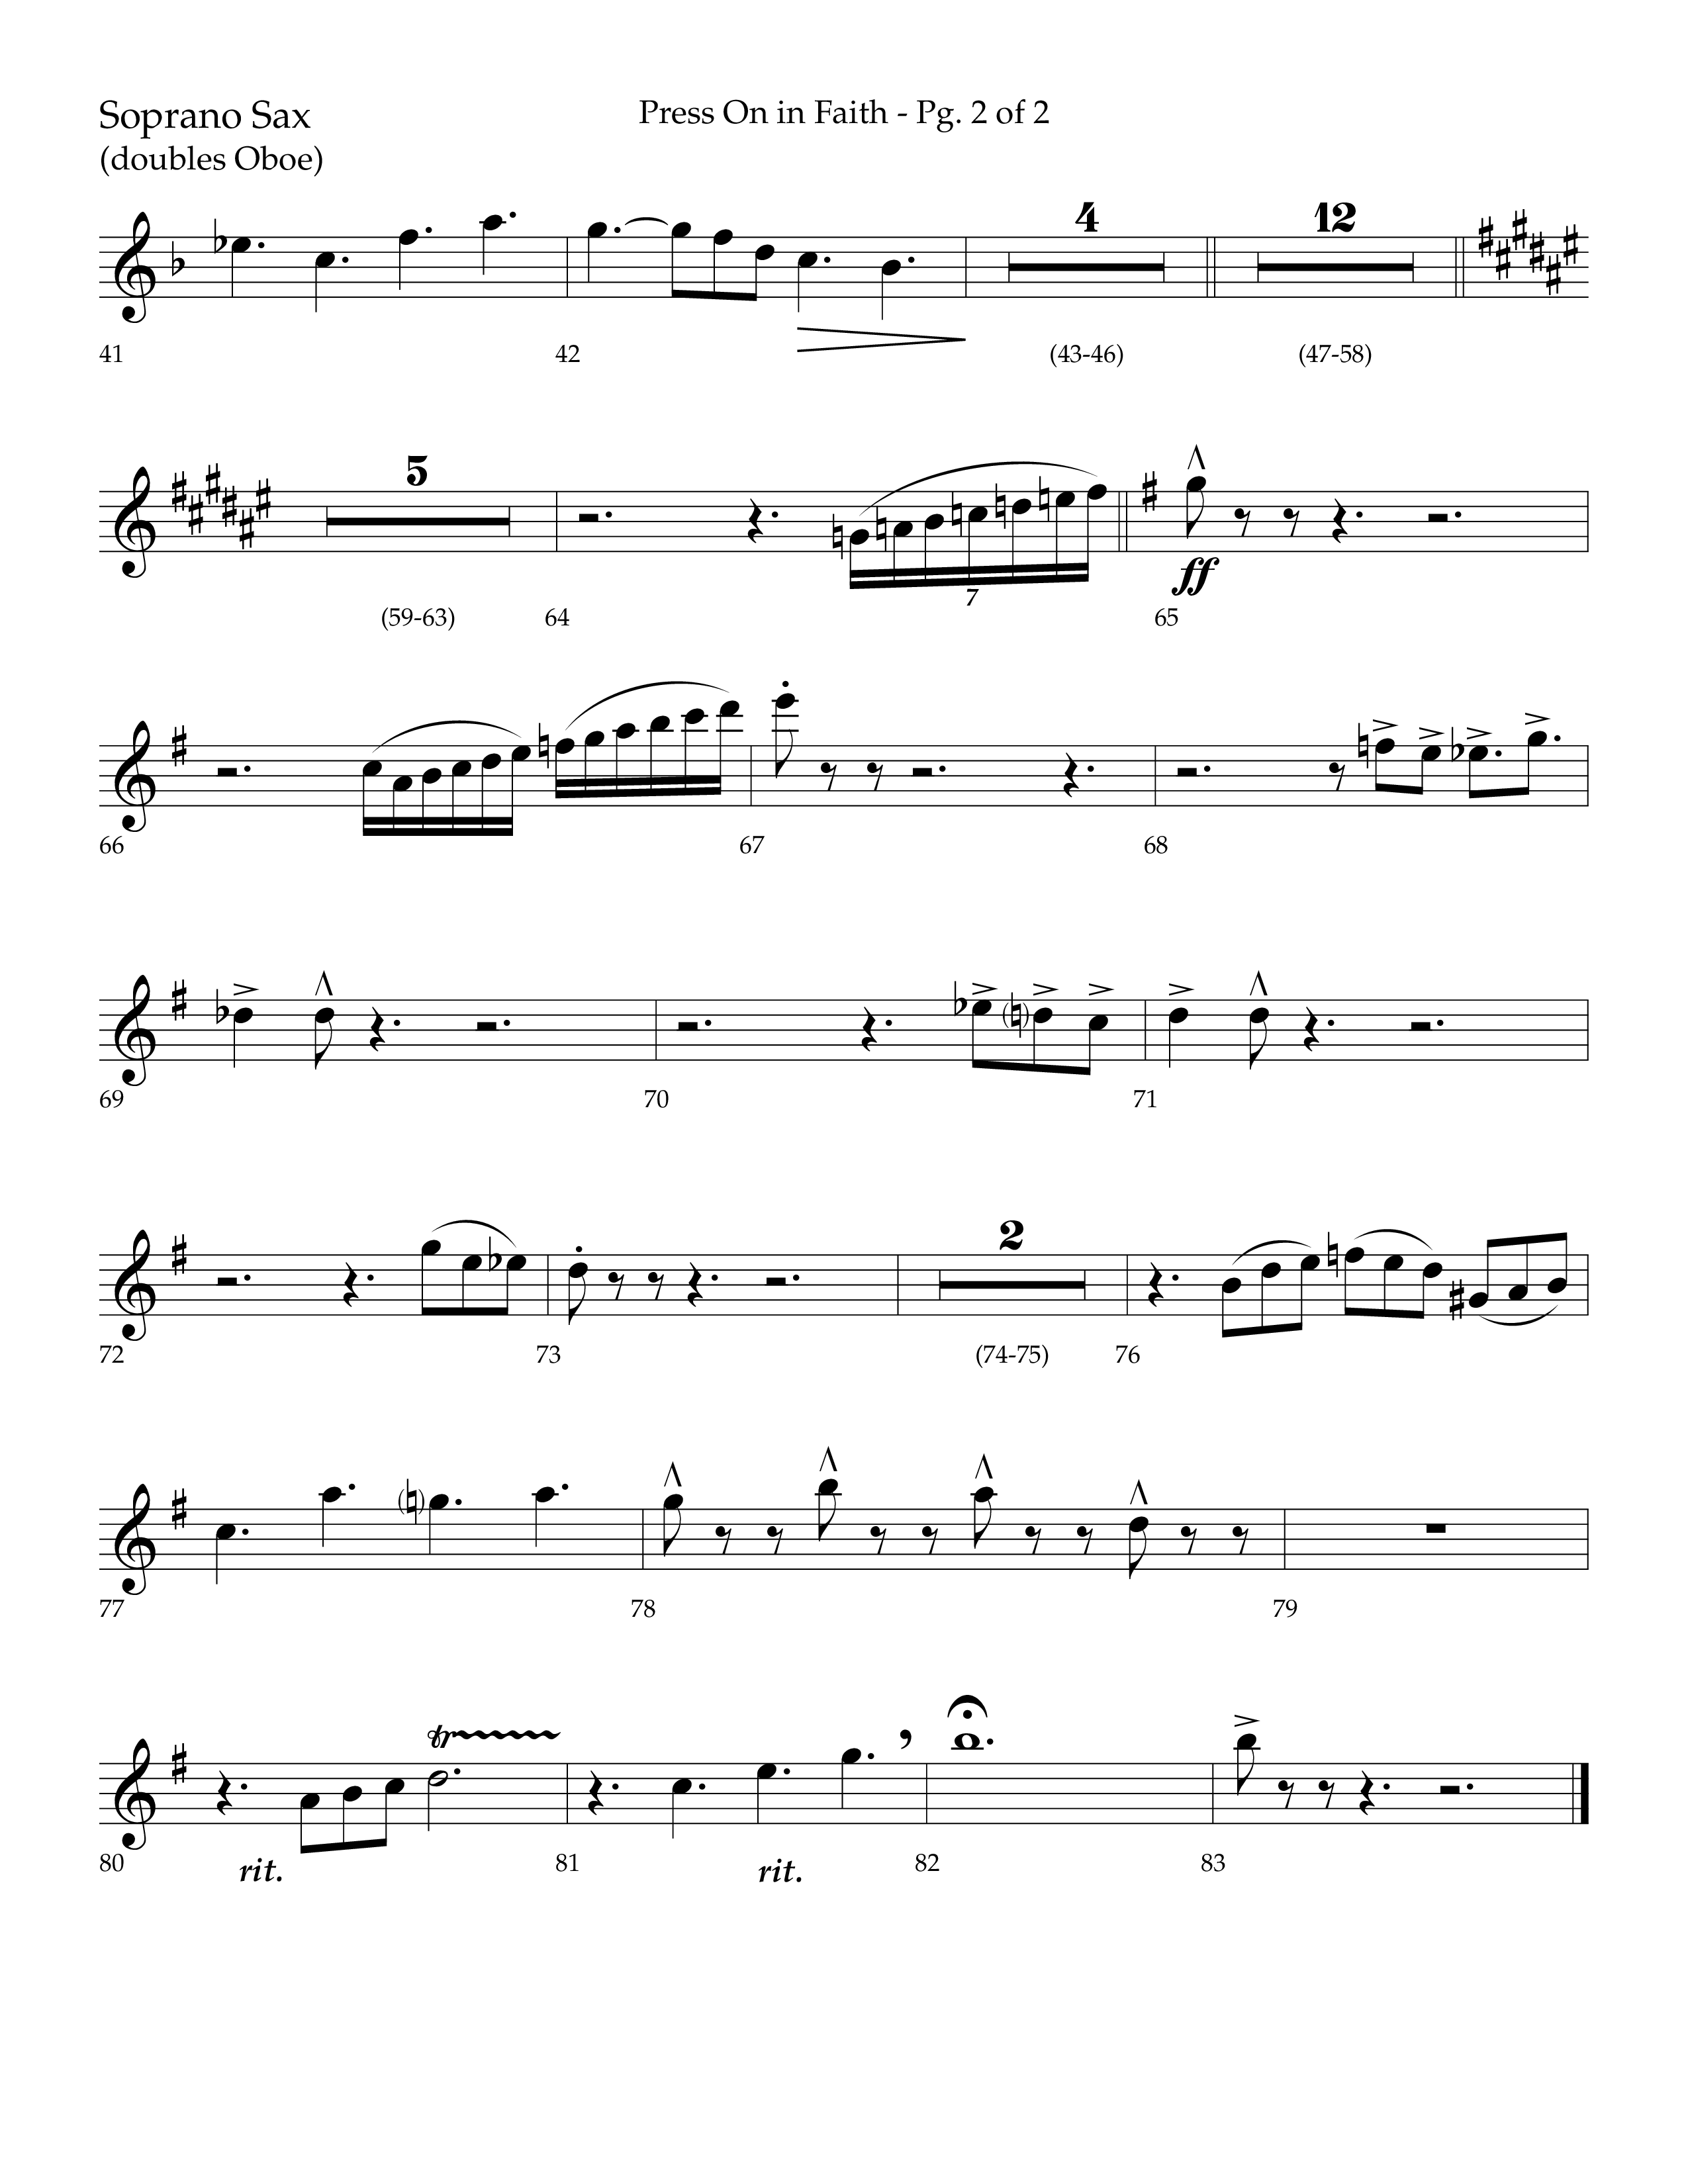 Press On In Faith with We’ve Come This Far By Faith Choral Anthem SATB Soprano Sax (Lifeway Choral / Orch. Bradley Knight)